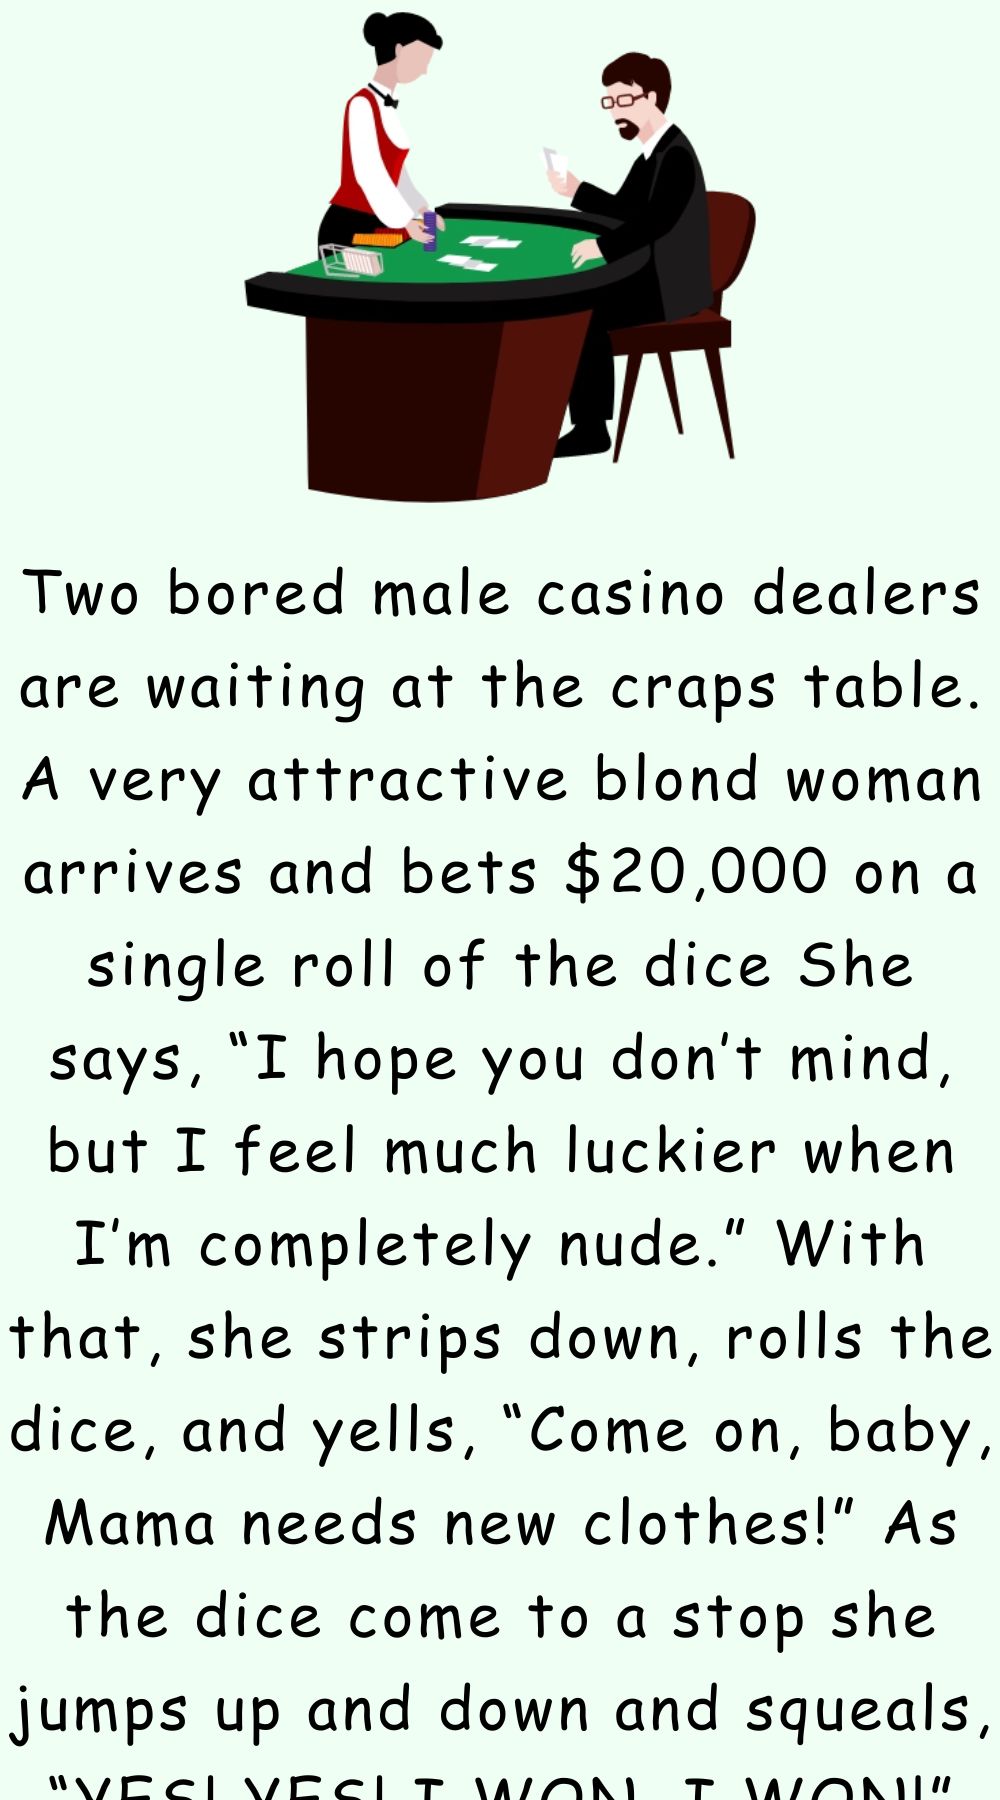 Two bored male casino dealers are waiting